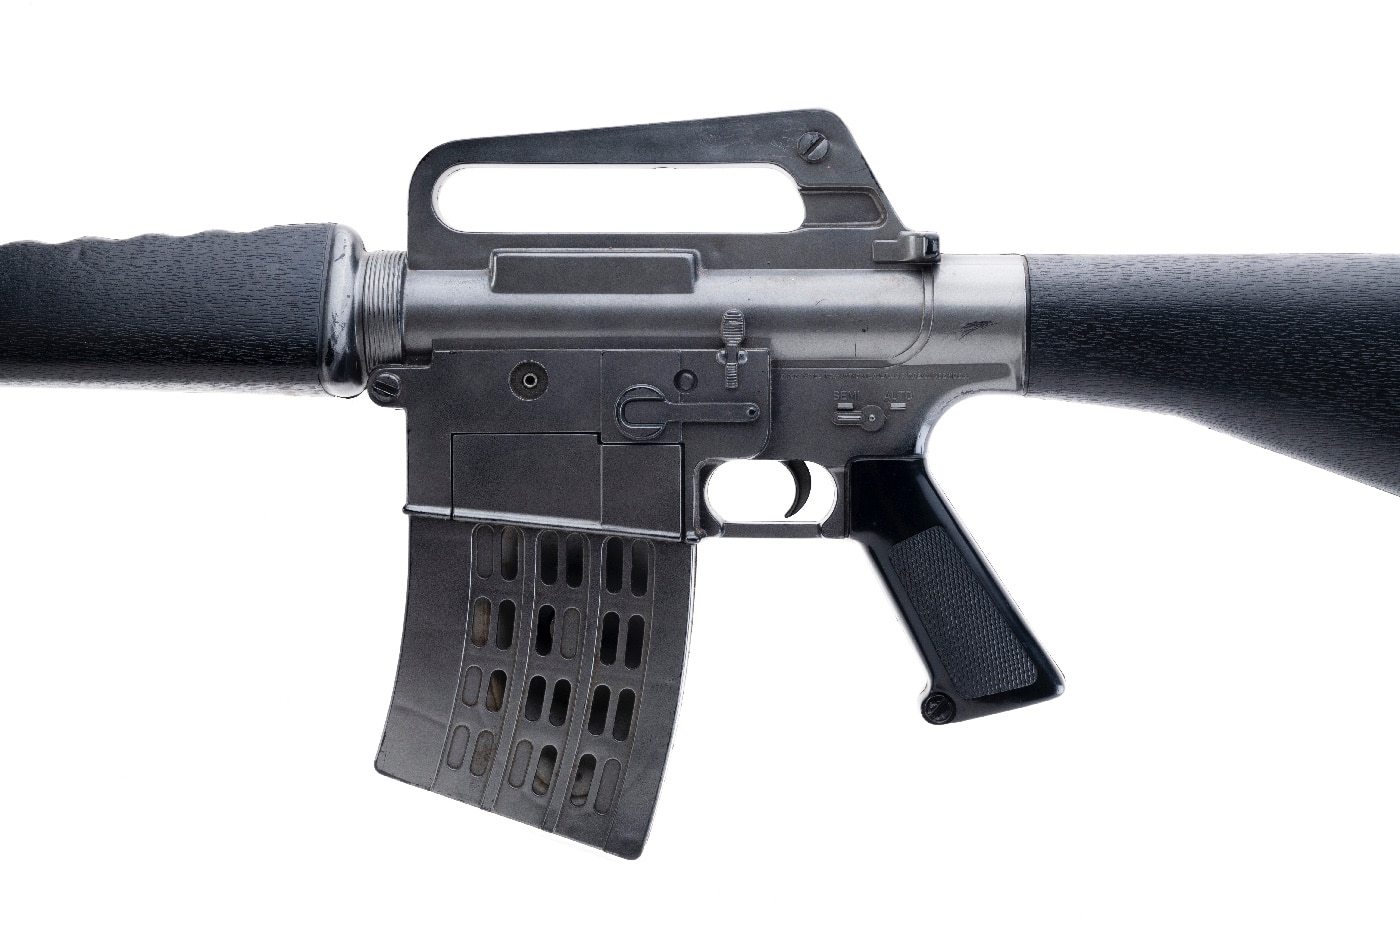 Shown is the left side of the Mattel Marauder. The holes in the magazine allow for the unobstructed flow of sound from the internal speaker. Image by Jeff Hallinan of Collectors Firearms in Houston, Texas